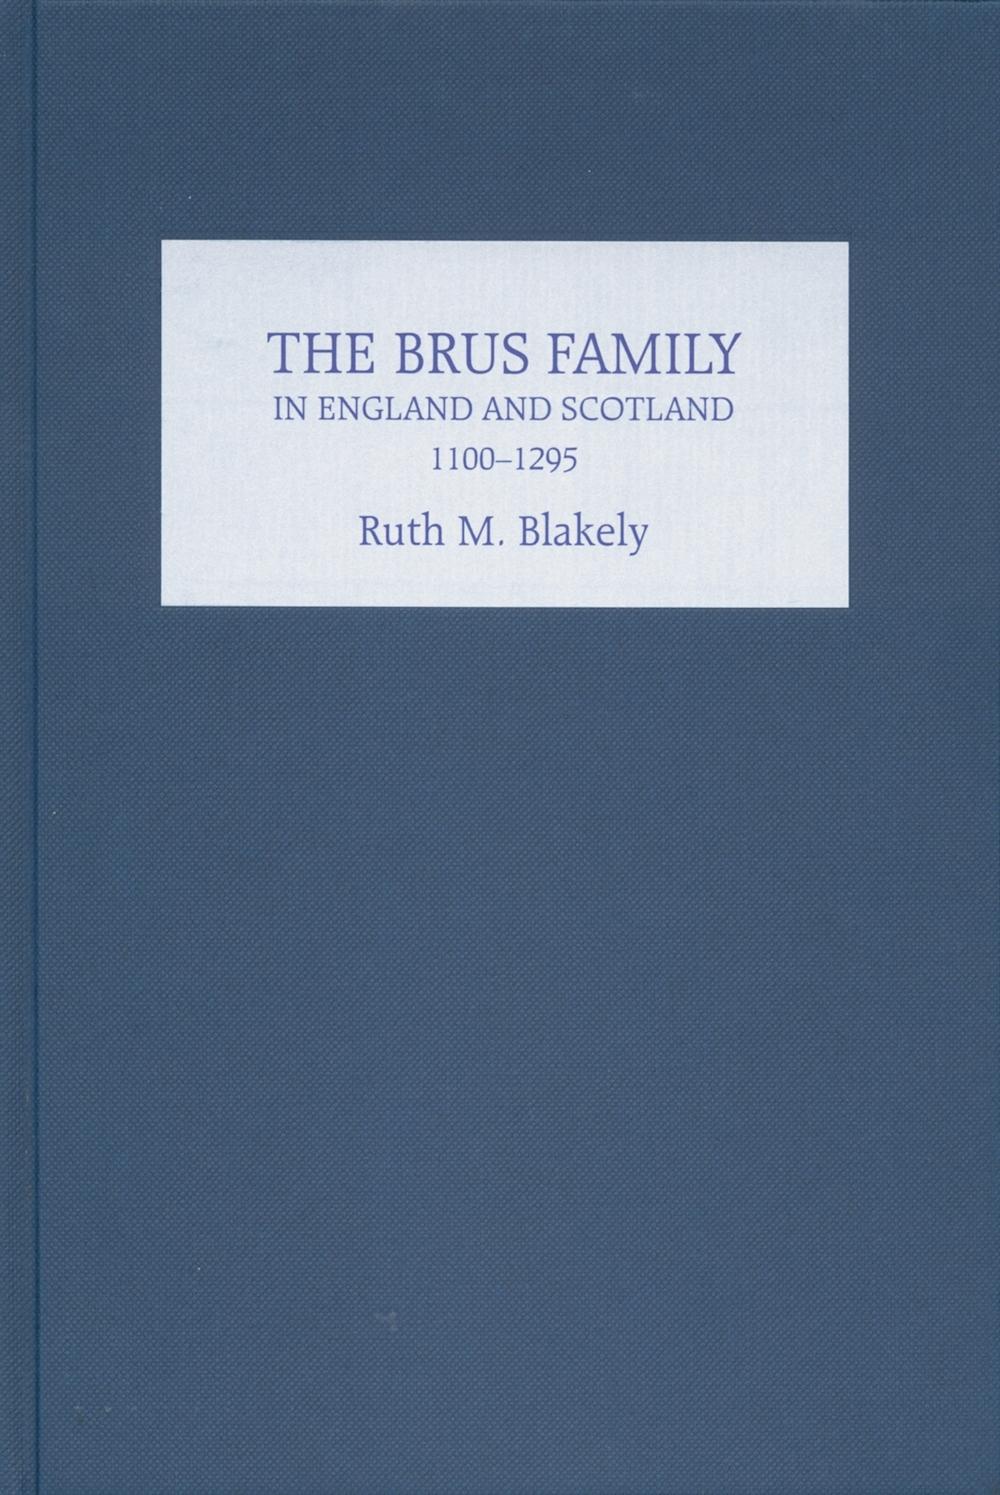 The Brus Family in England and Scotland, 1100-1295 - Blakely, Ruth